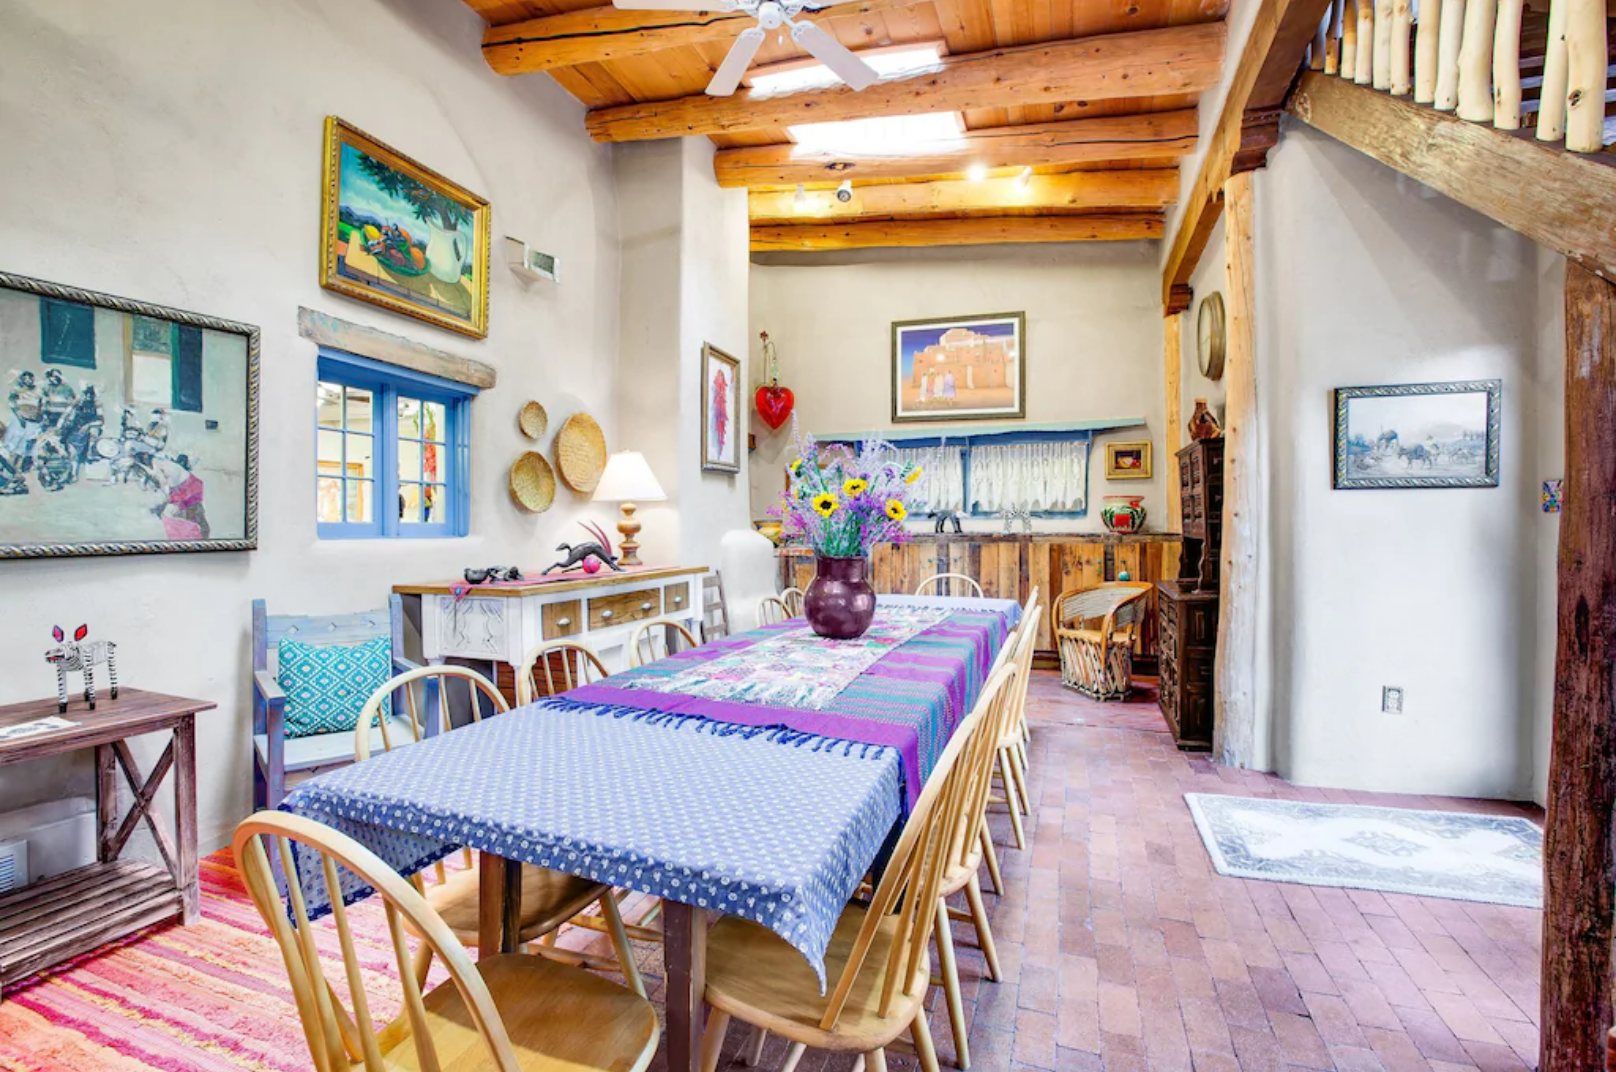 The Best New Mexico Vacation Rentals